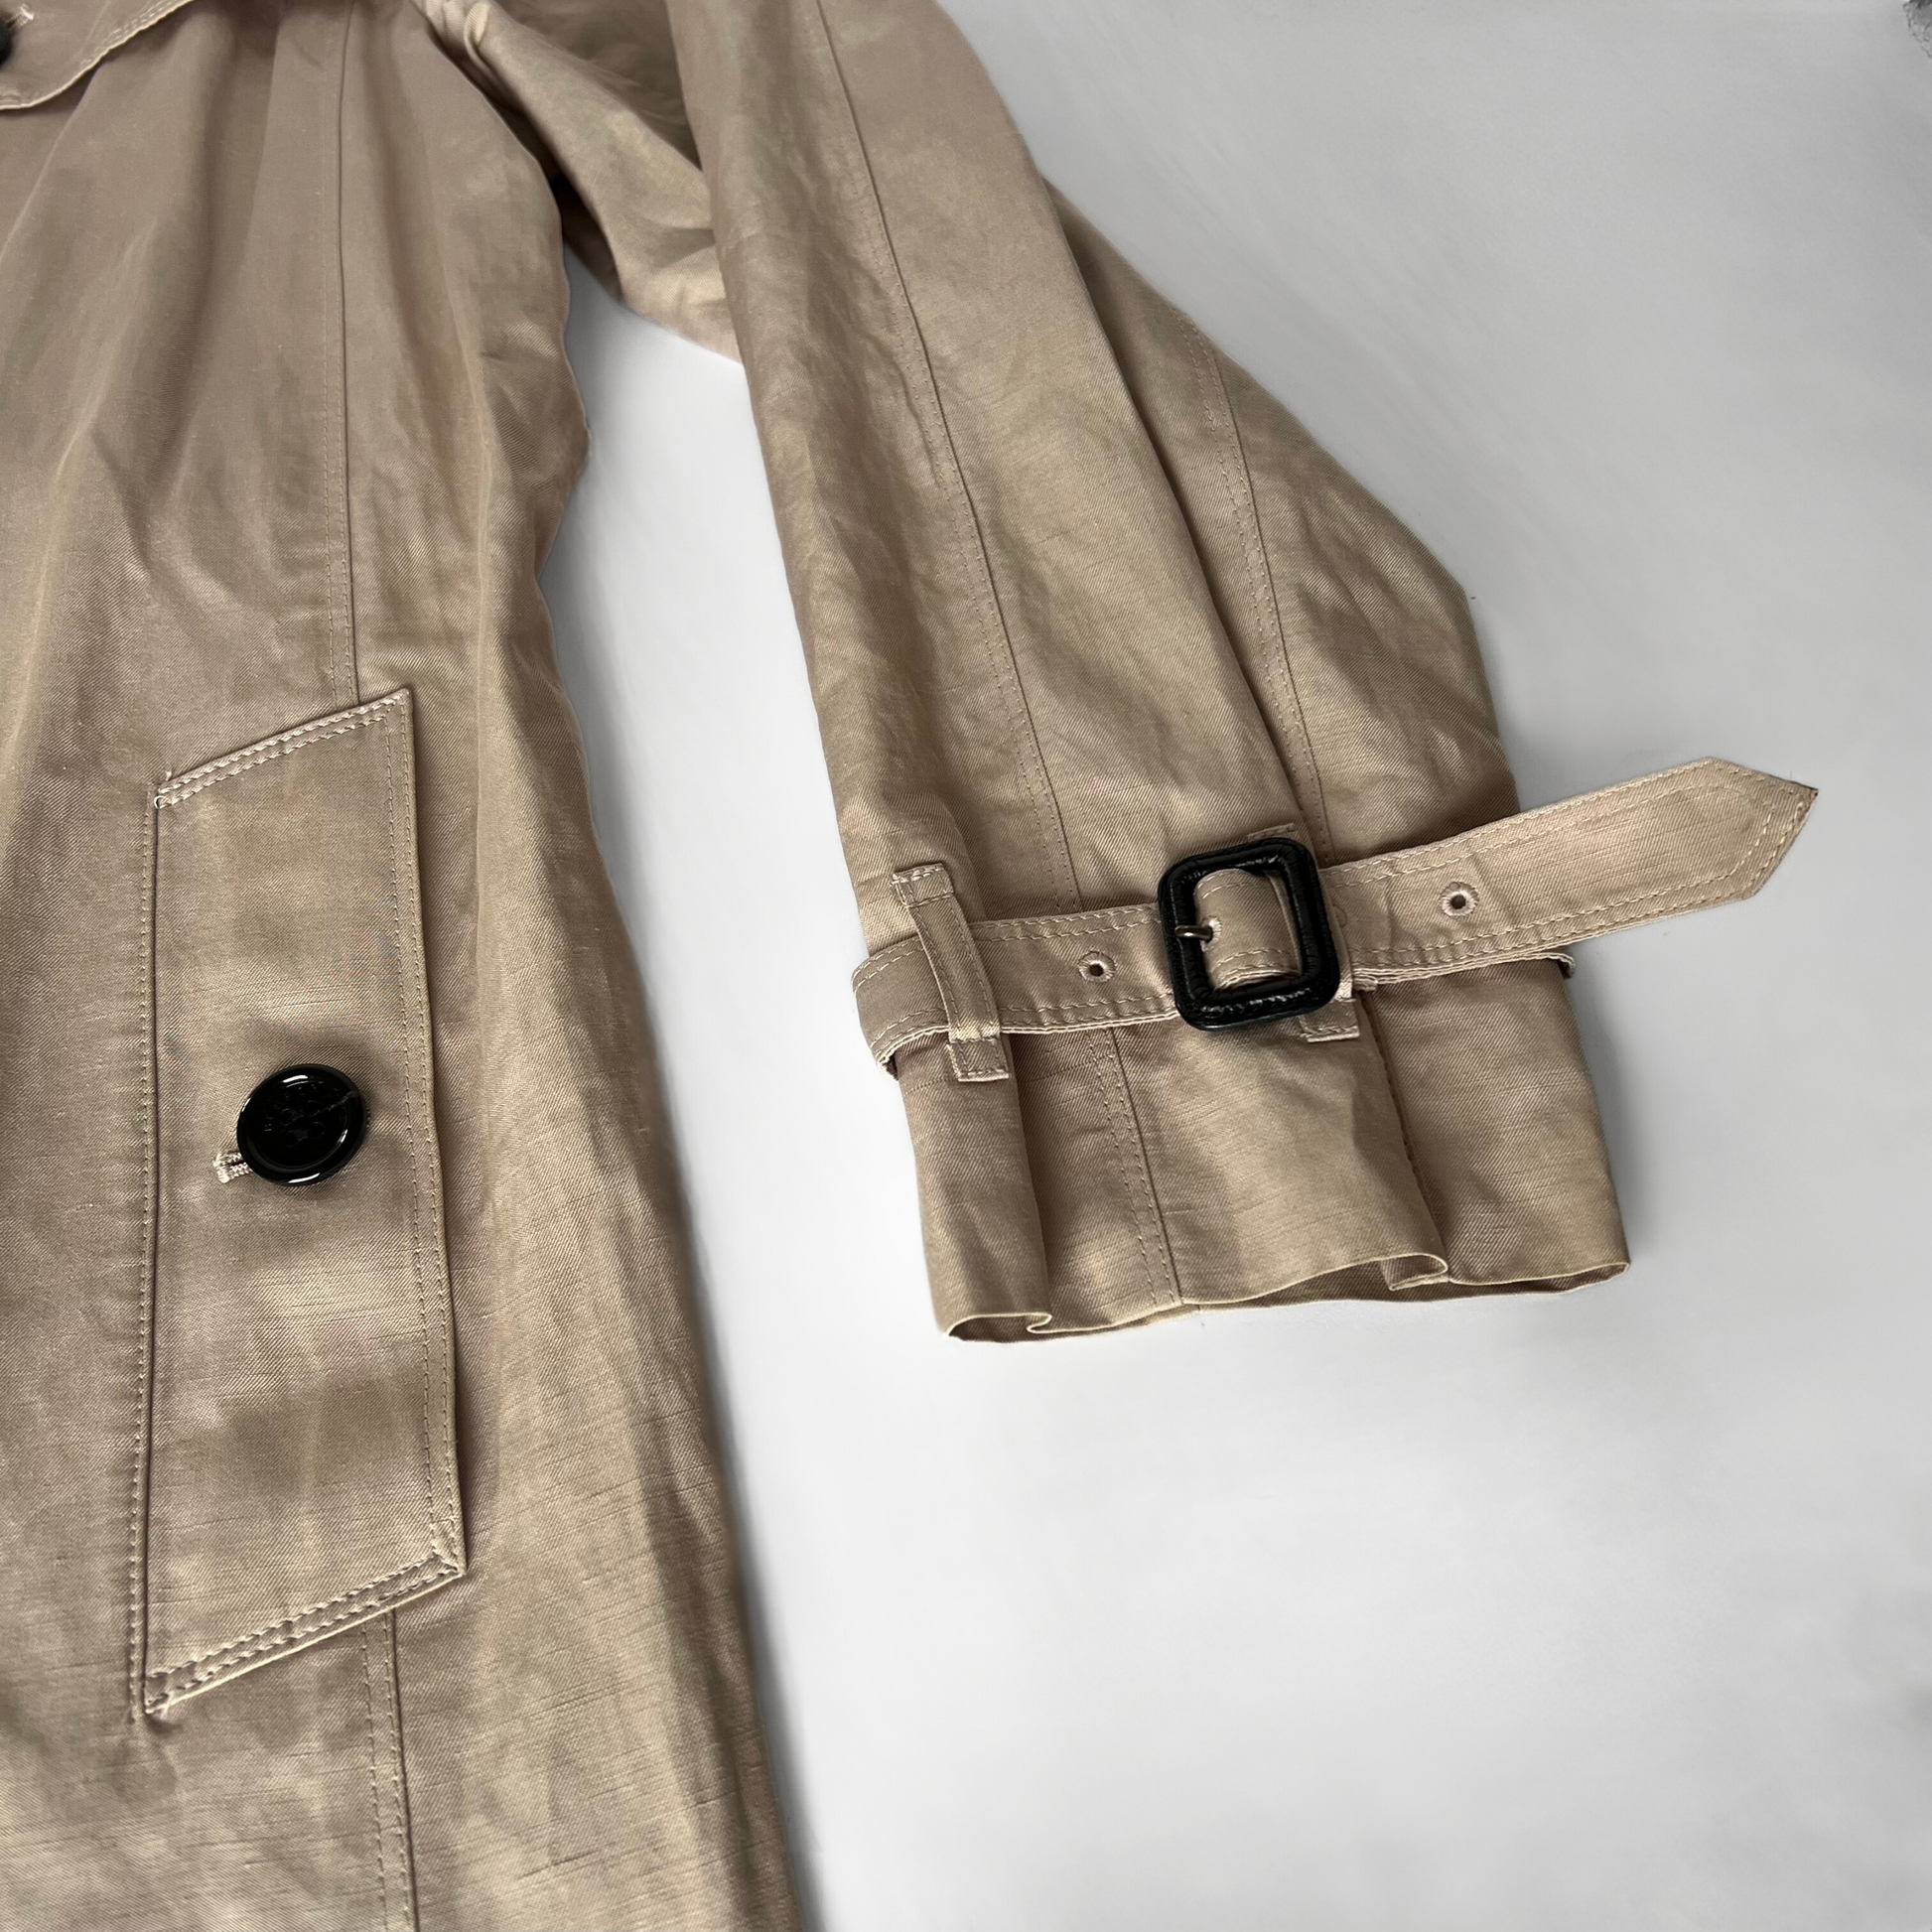 Burberry Burberry Trench Coat Linen Blend - Clothing - Etoile Luxury Vintage